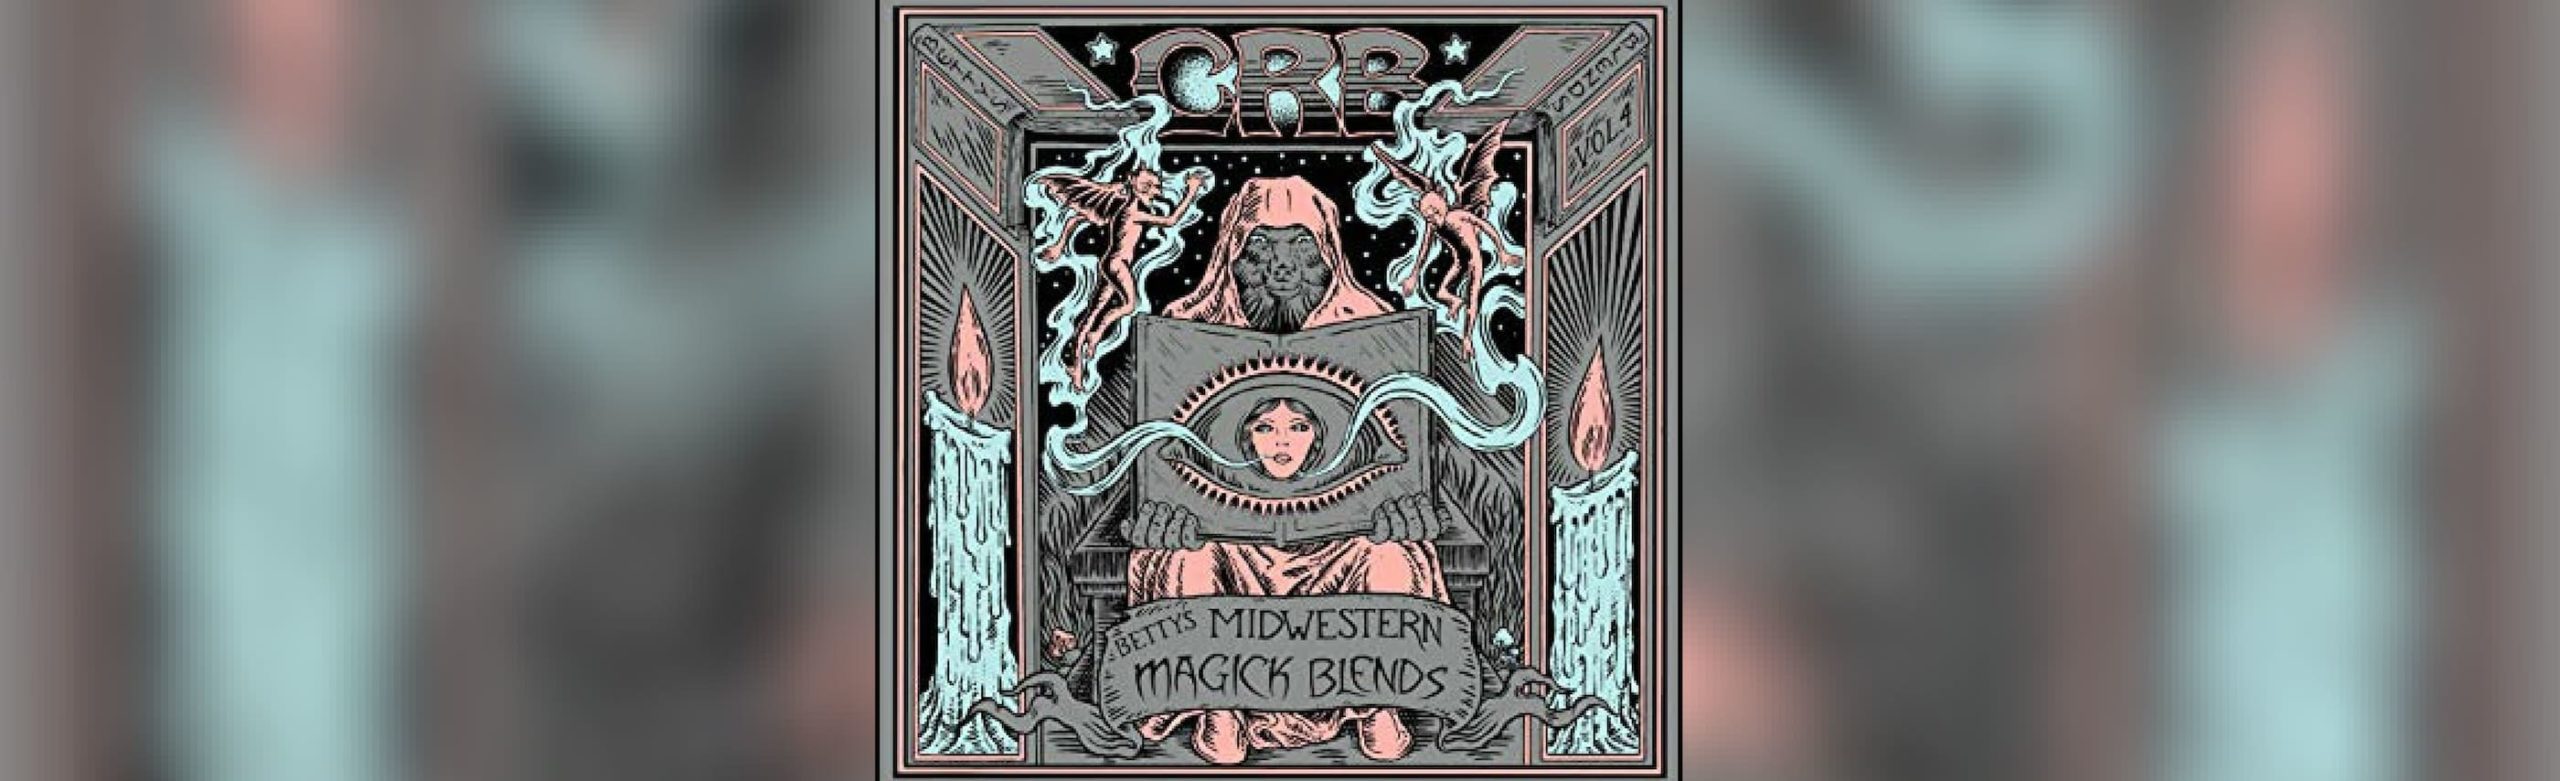 Chris Robinson Brotherhood Releases Live Album “Betty’s Midwestern Magick Blends” Image